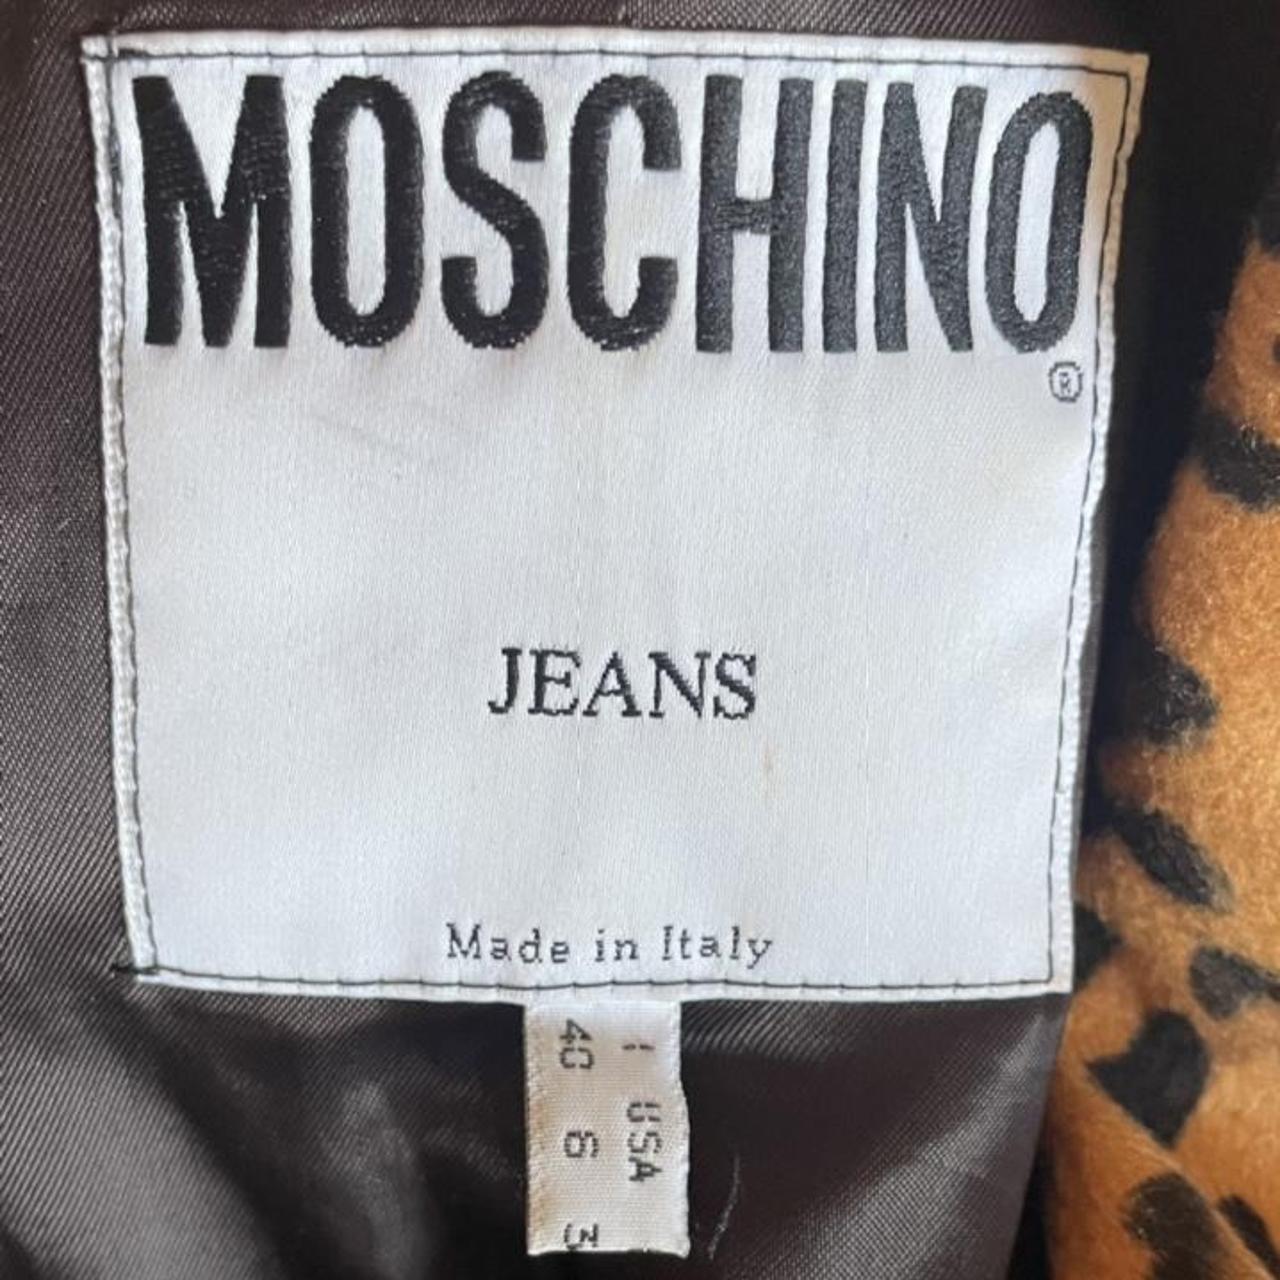 Vintage 90s animal print jacket by Moschino jeans,... - Depop